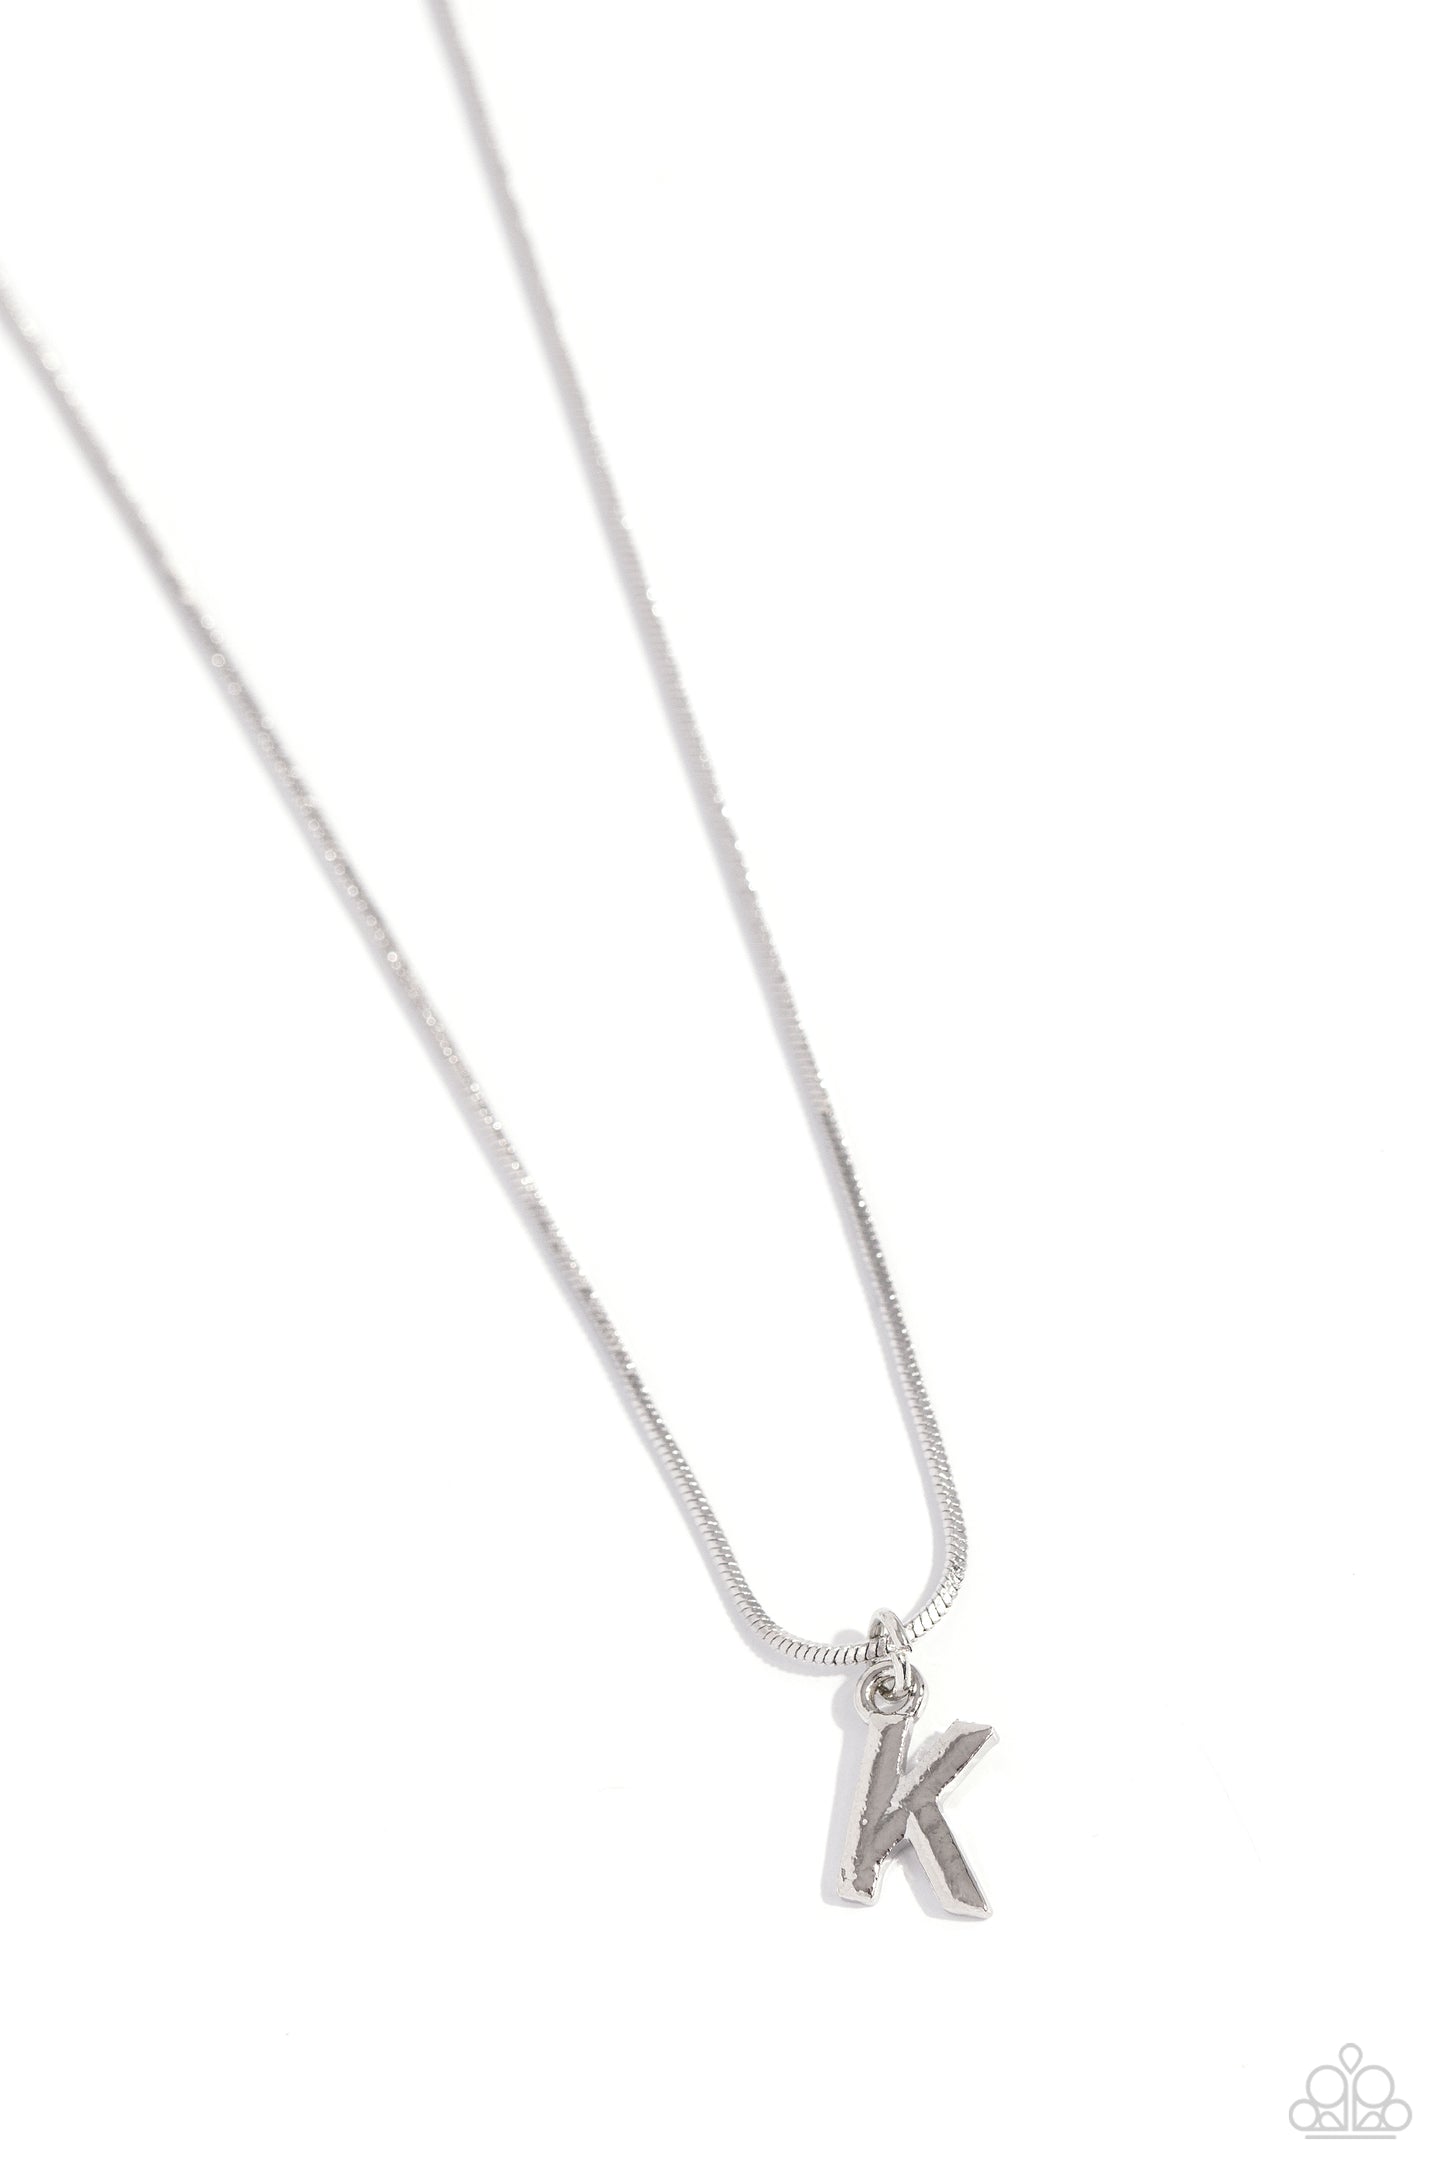 Seize the Initial Paparazzi Accessories Necklaces with Earrings - Silver - K